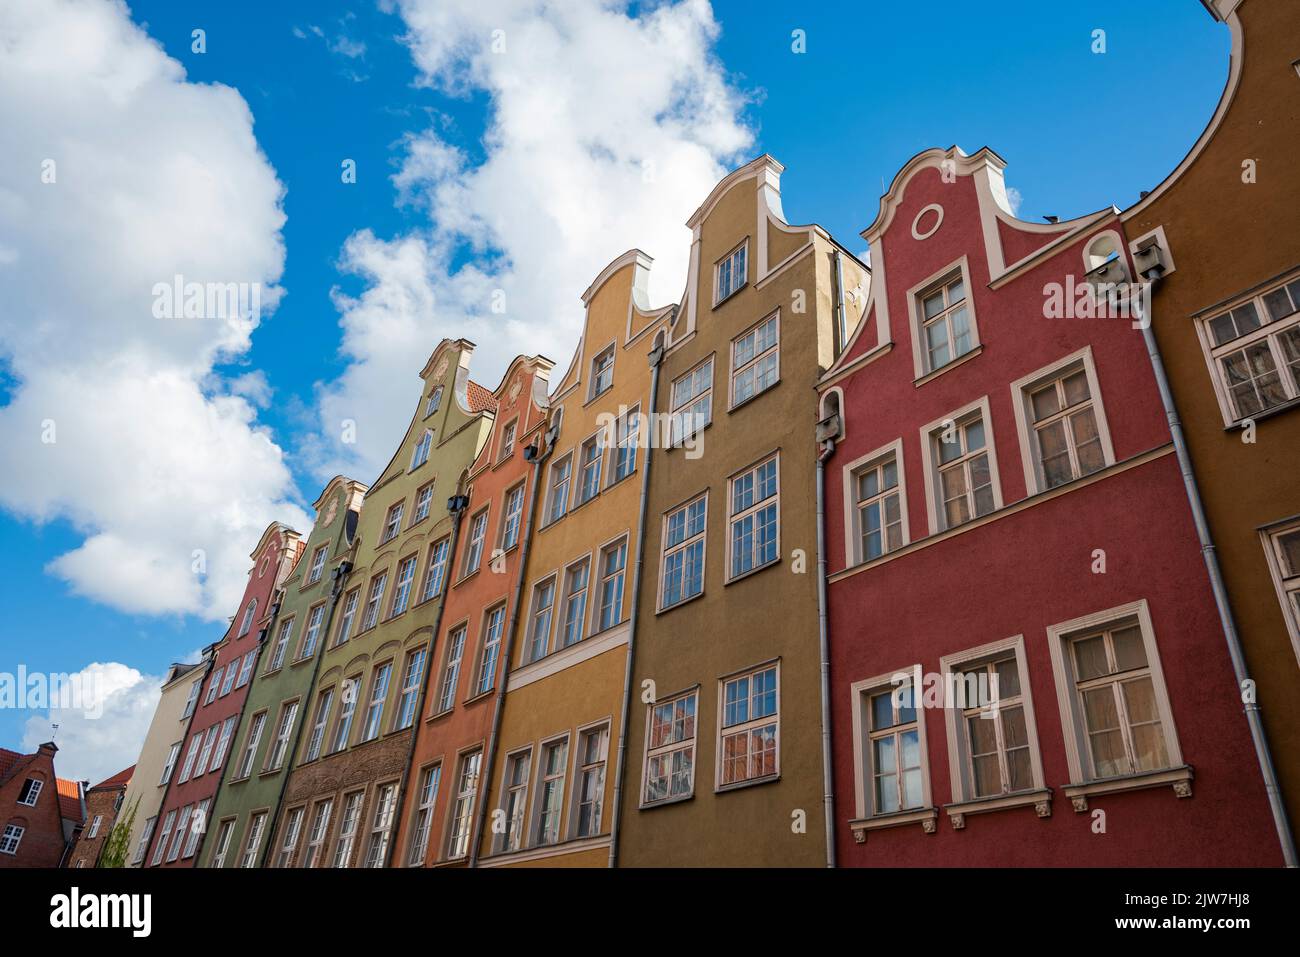 Poland ,beautiful colorful houses on the old town in Gdansk Stock Photo